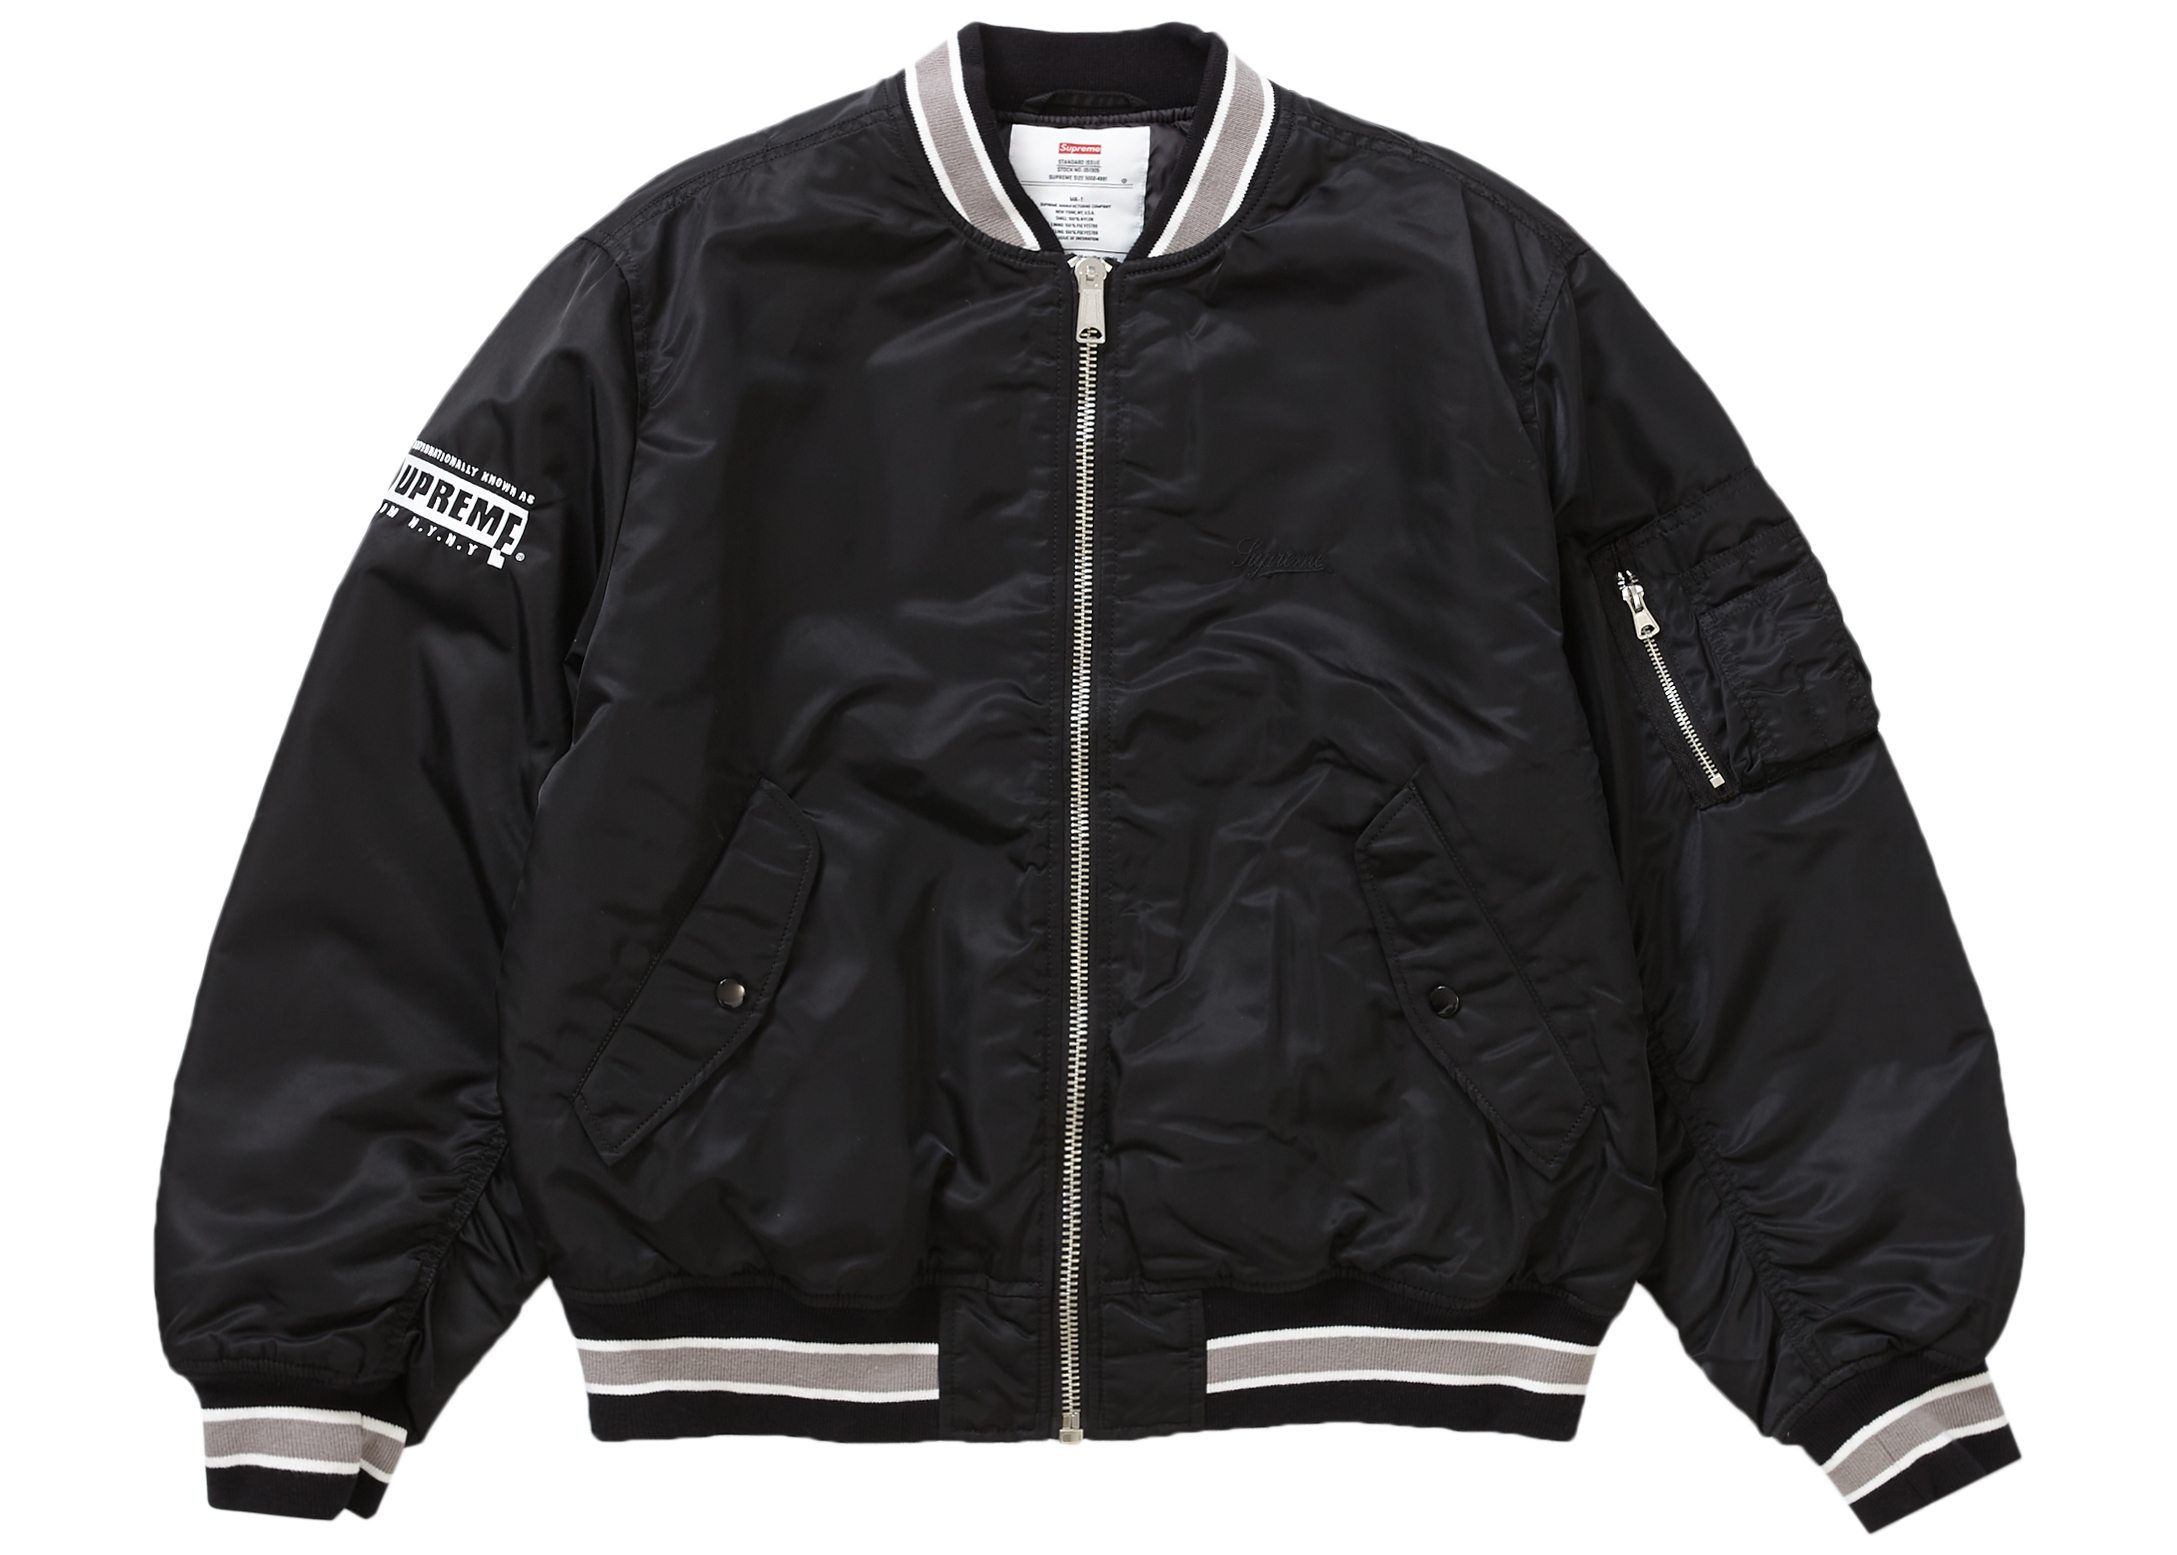 Supreme Second To None MA-1 Jacket Black Men's - SS22 - US